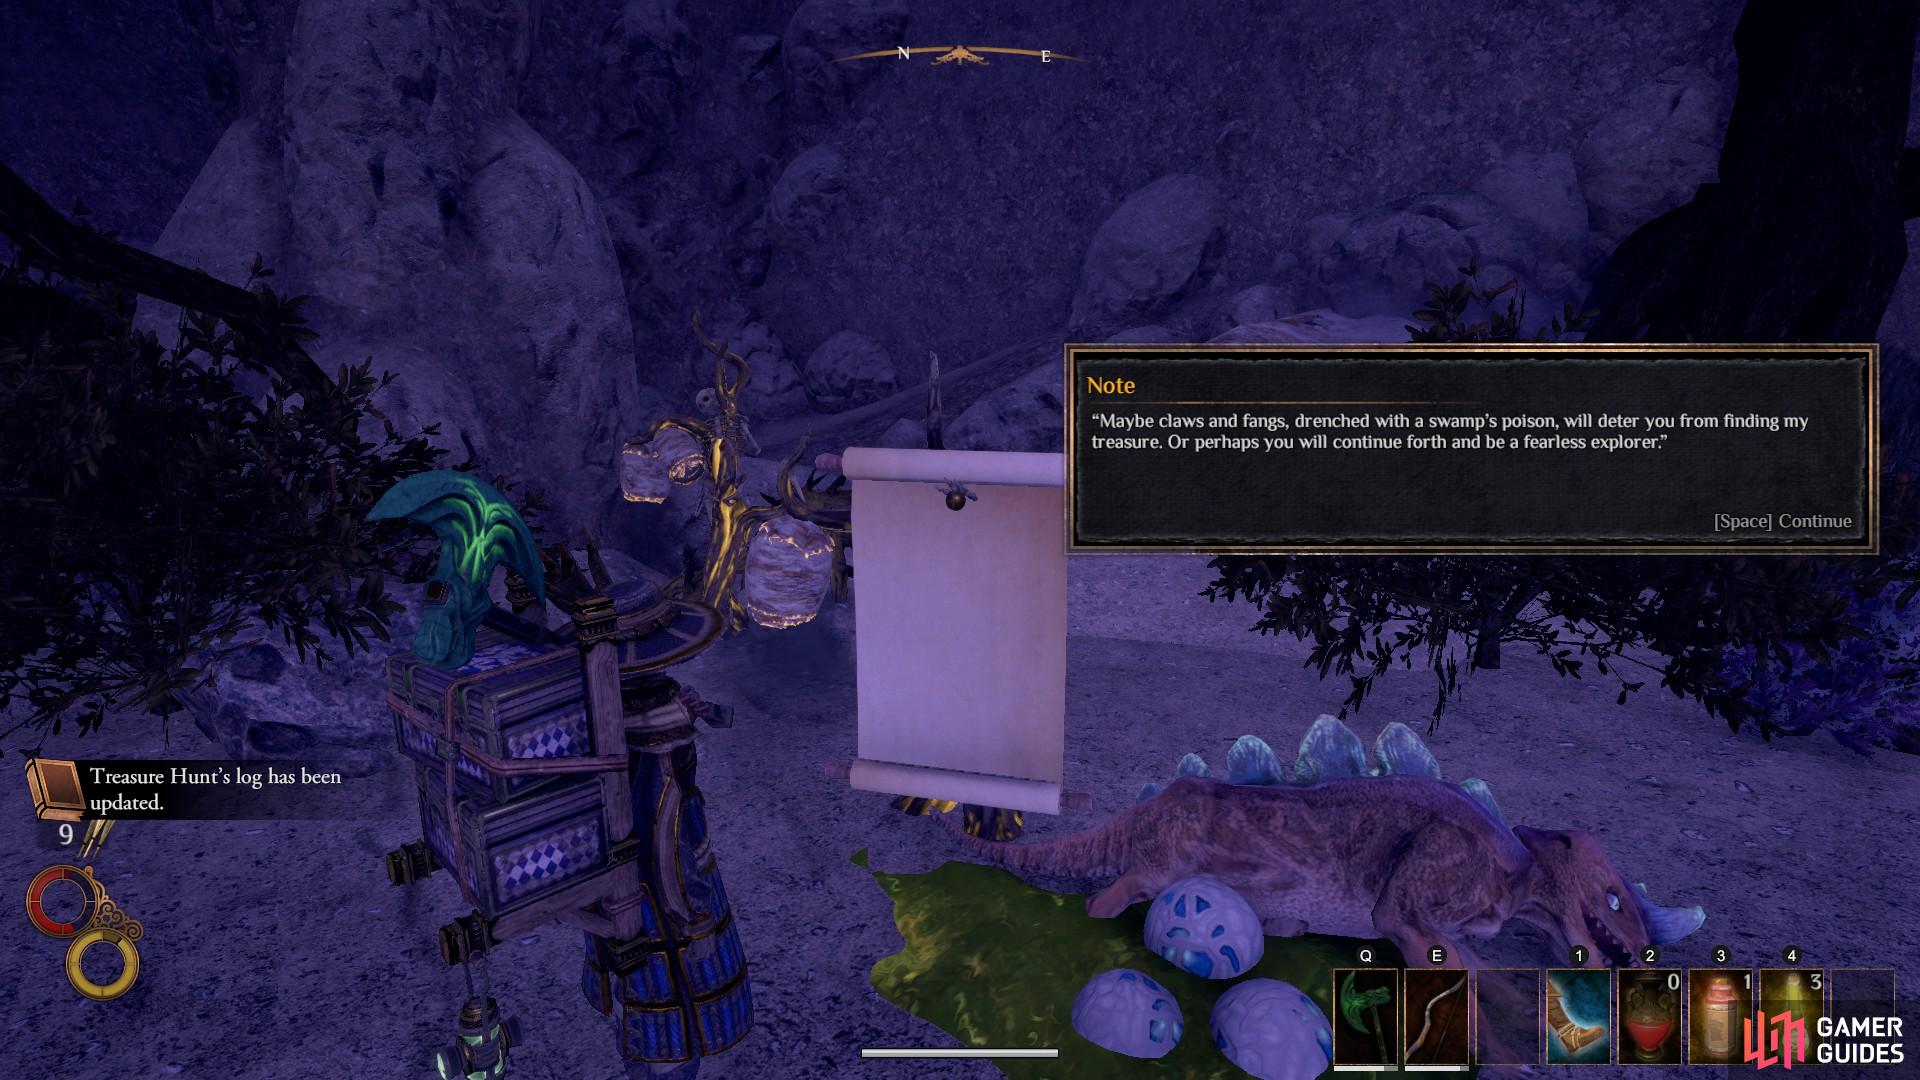 When you have defeated the Hive Lord, read the note for the next clue before you leave.